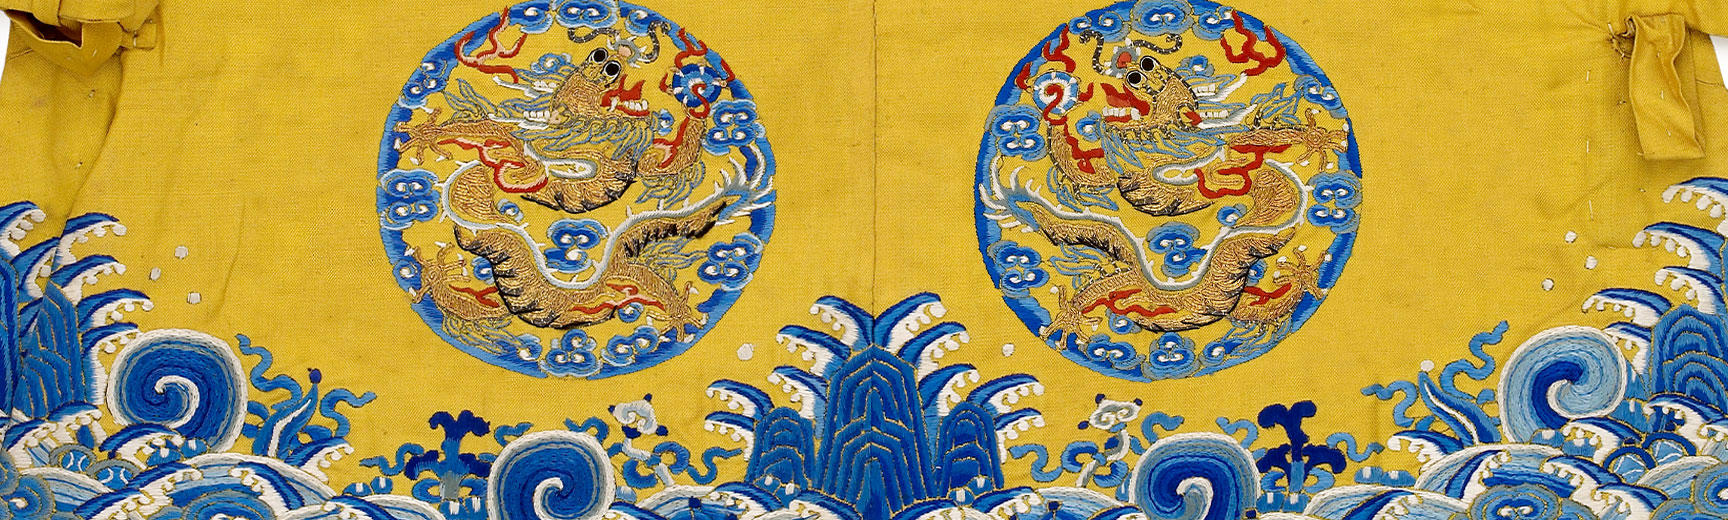 Blue and Yellow Chinese Robe Decorated with Dragons